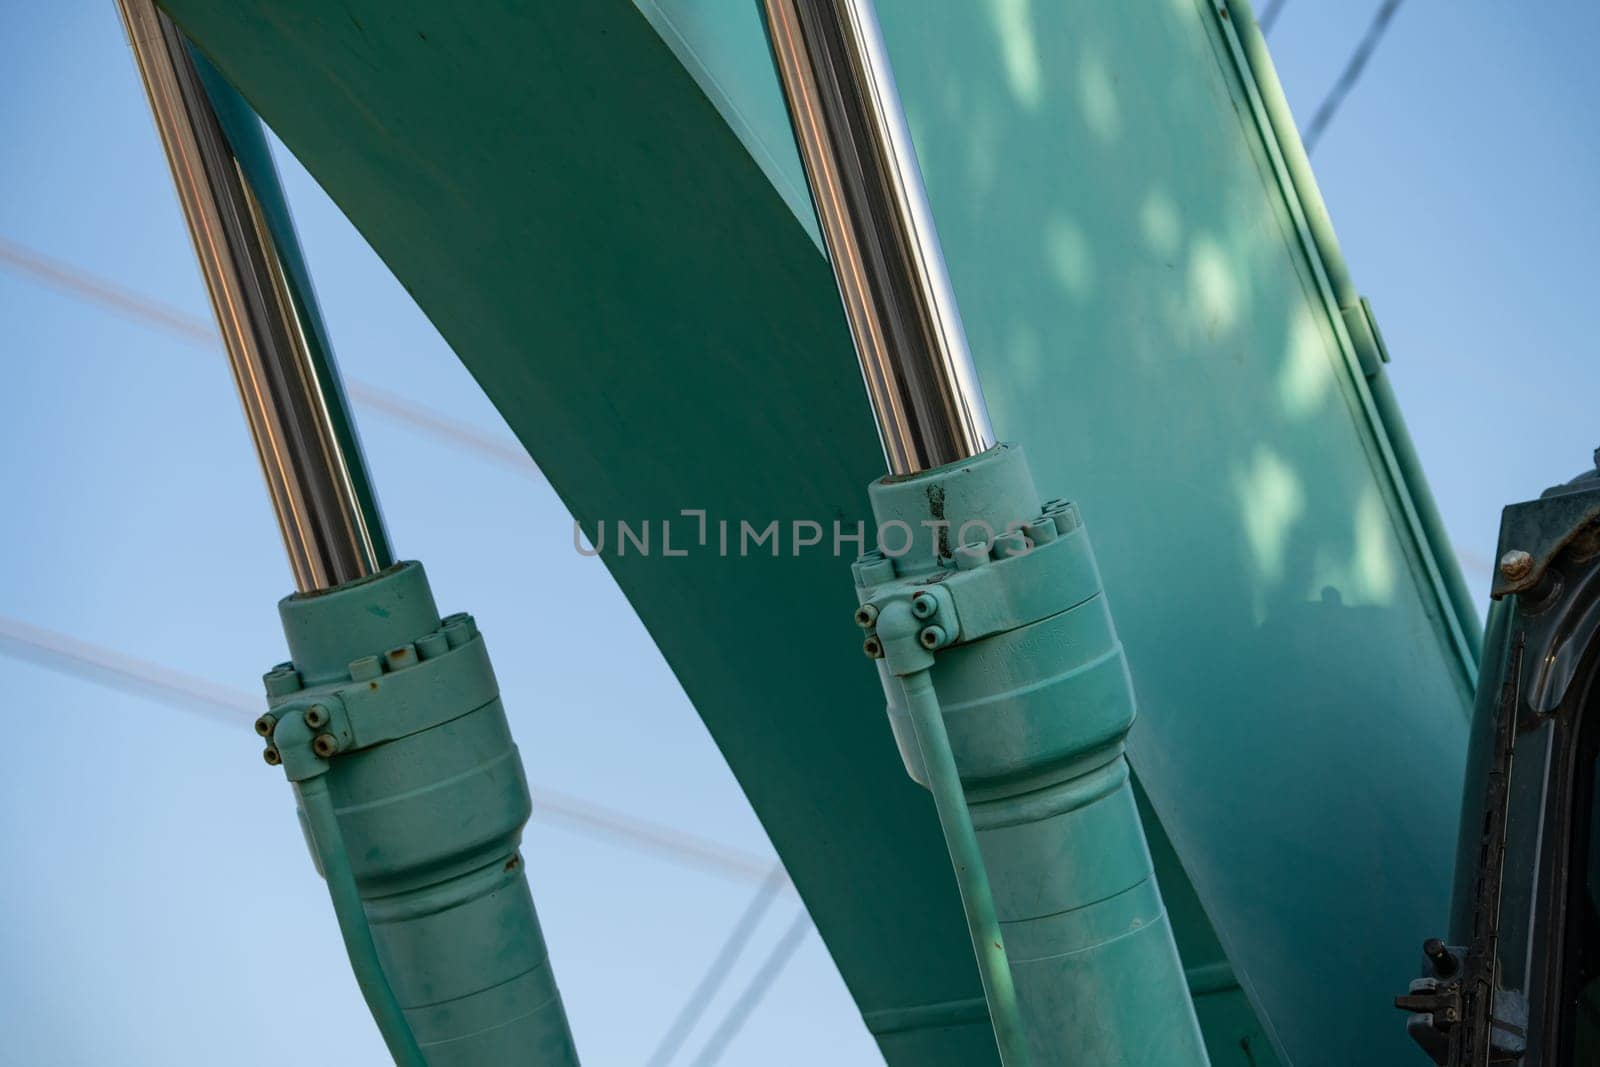 Closeup view of stainless steel hydraulic arm on green excavator. Stainless steel power in the hydraulic arm of an excavator. Stainless steel hydraulic arm of excavator unveils industrial precision.